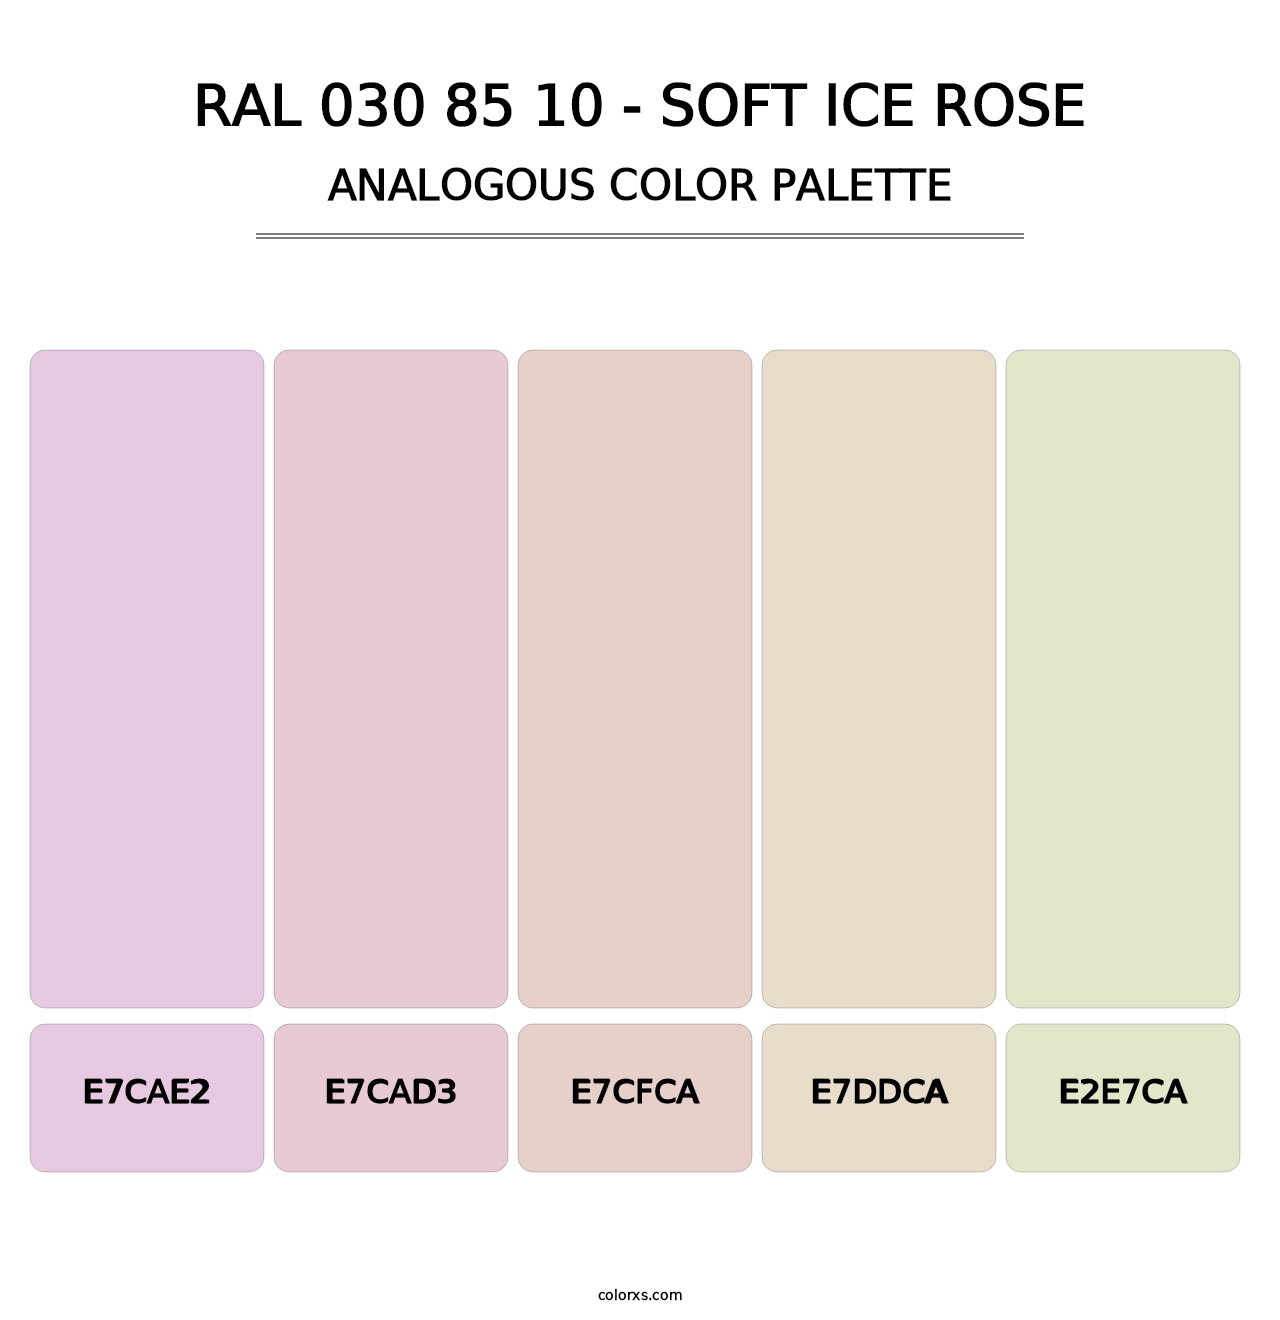 RAL 030 85 10 - Soft Ice Rose - Analogous Color Palette